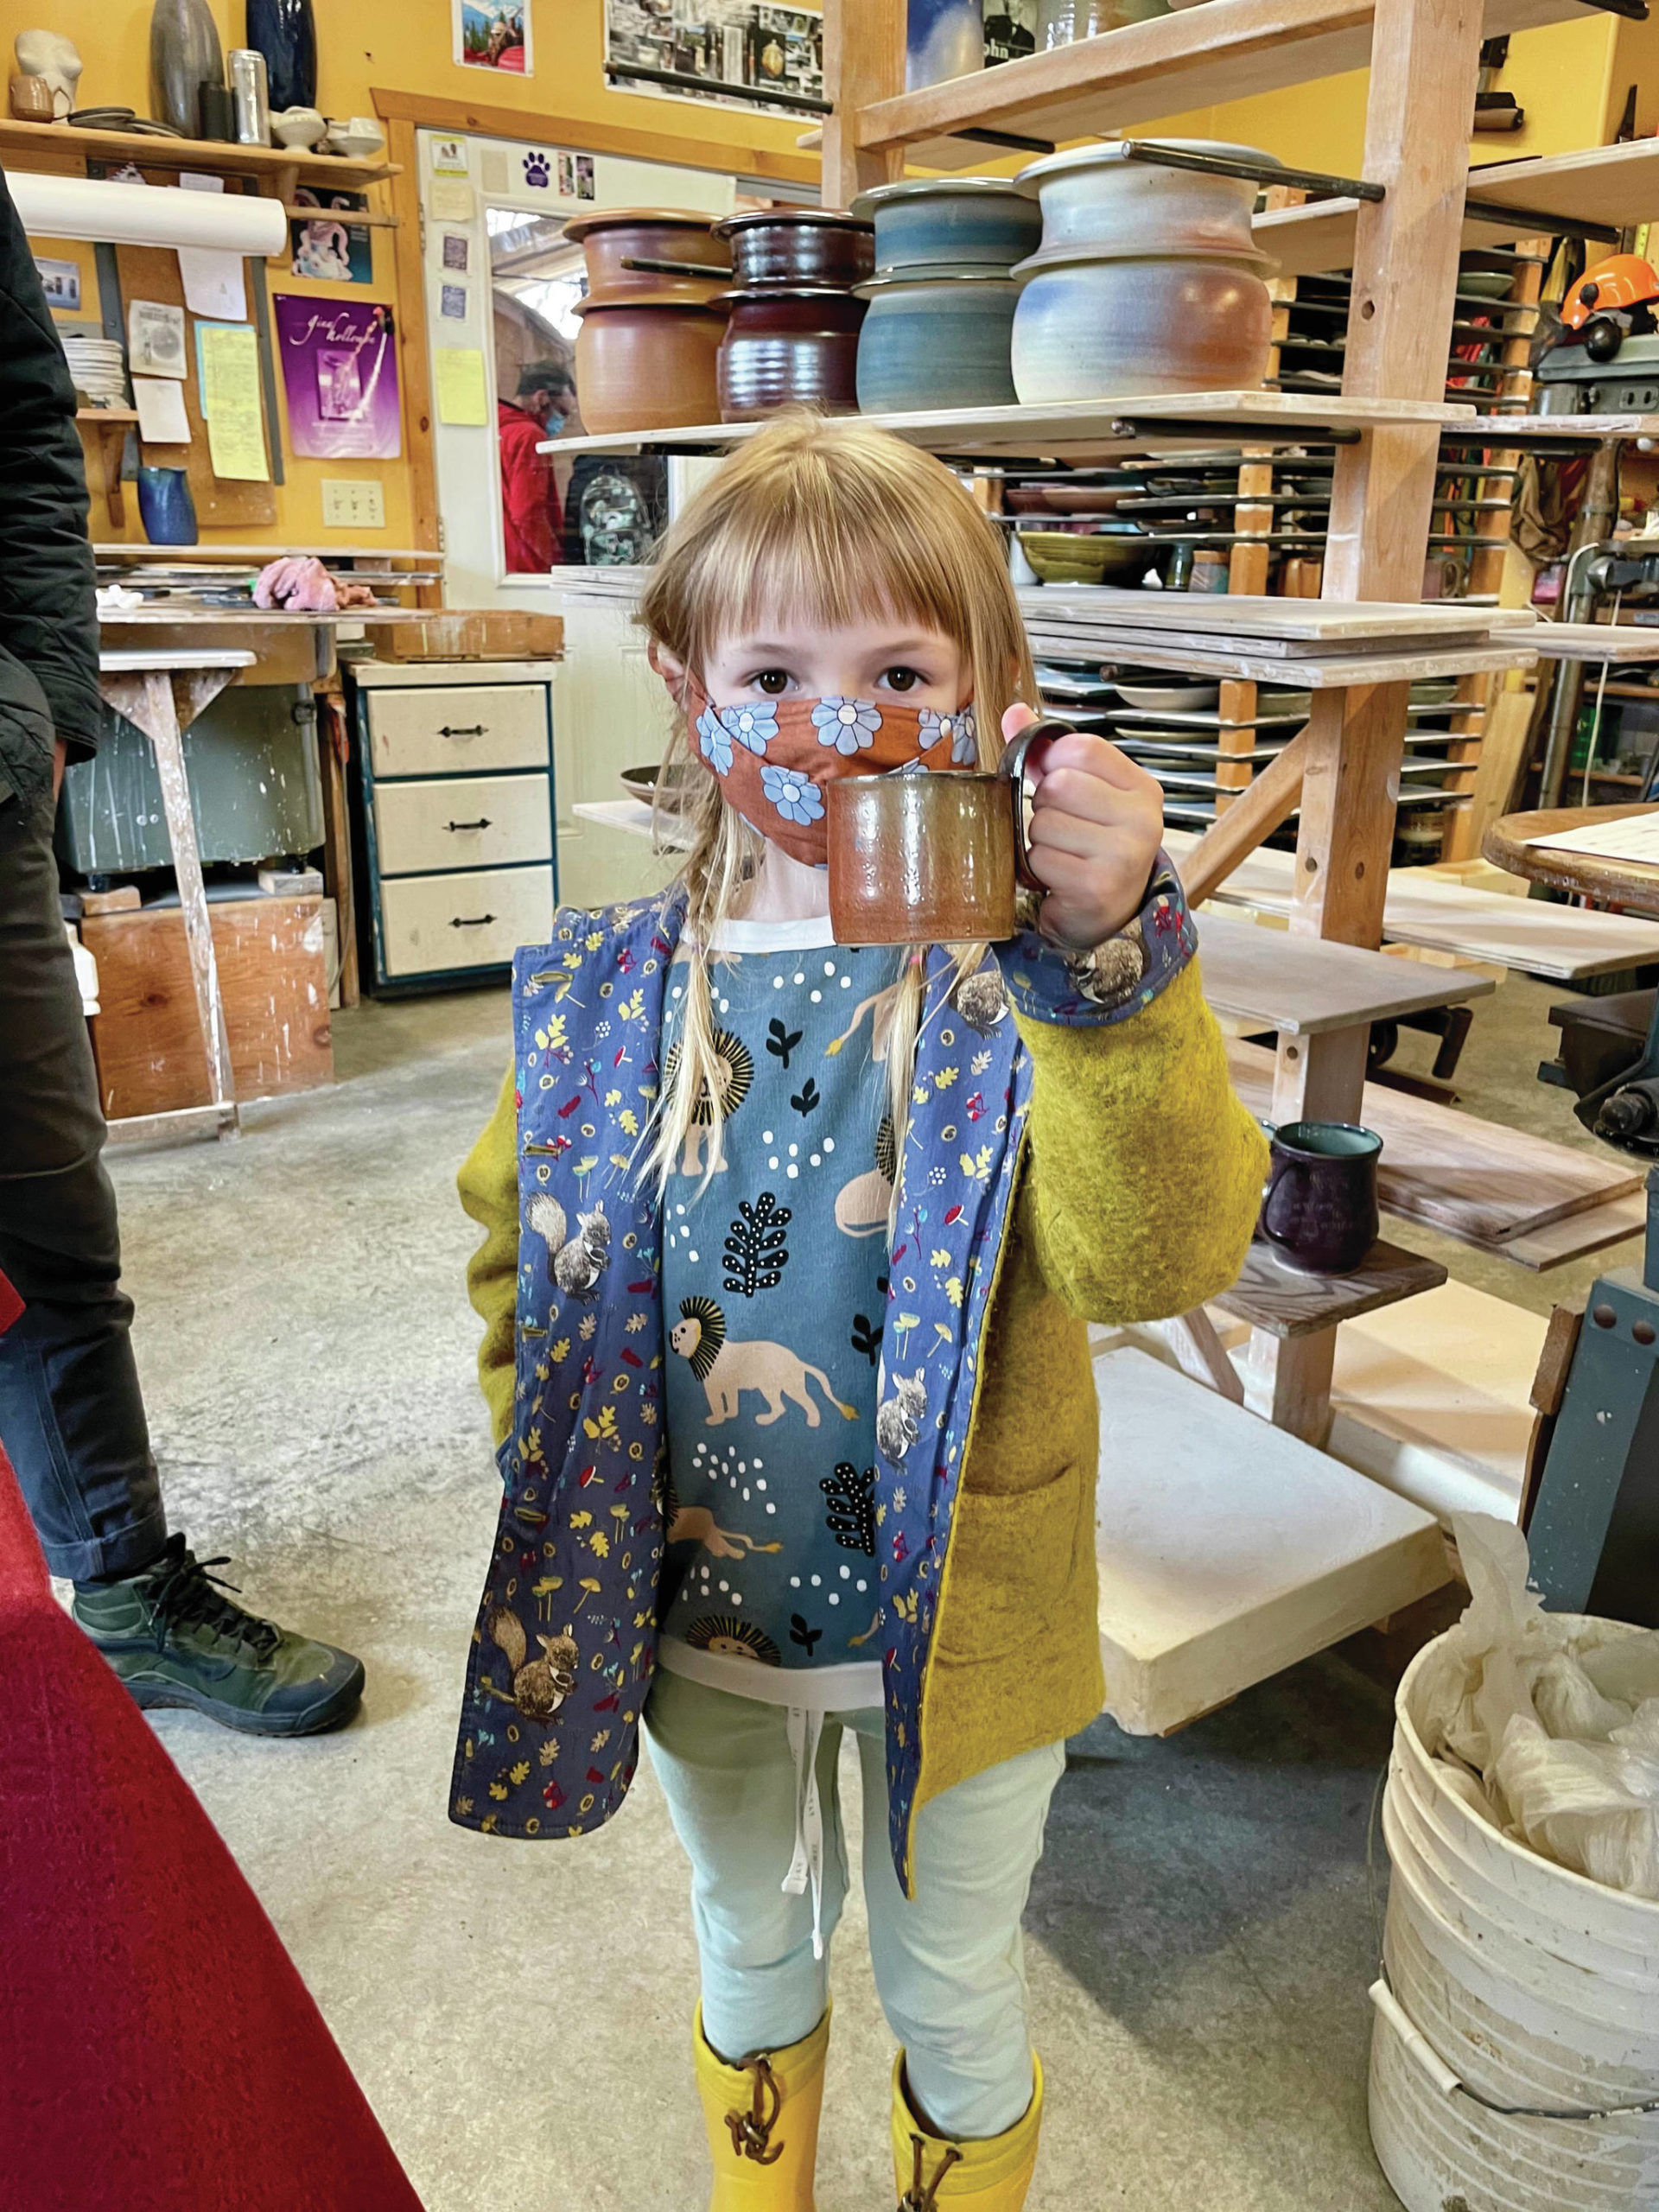 Photo by David Kaufman
Lulu Hawkins, age 6, holds up her pottery tour purchase — a David Kaufmann mug — at his studio in Homer on May 15.